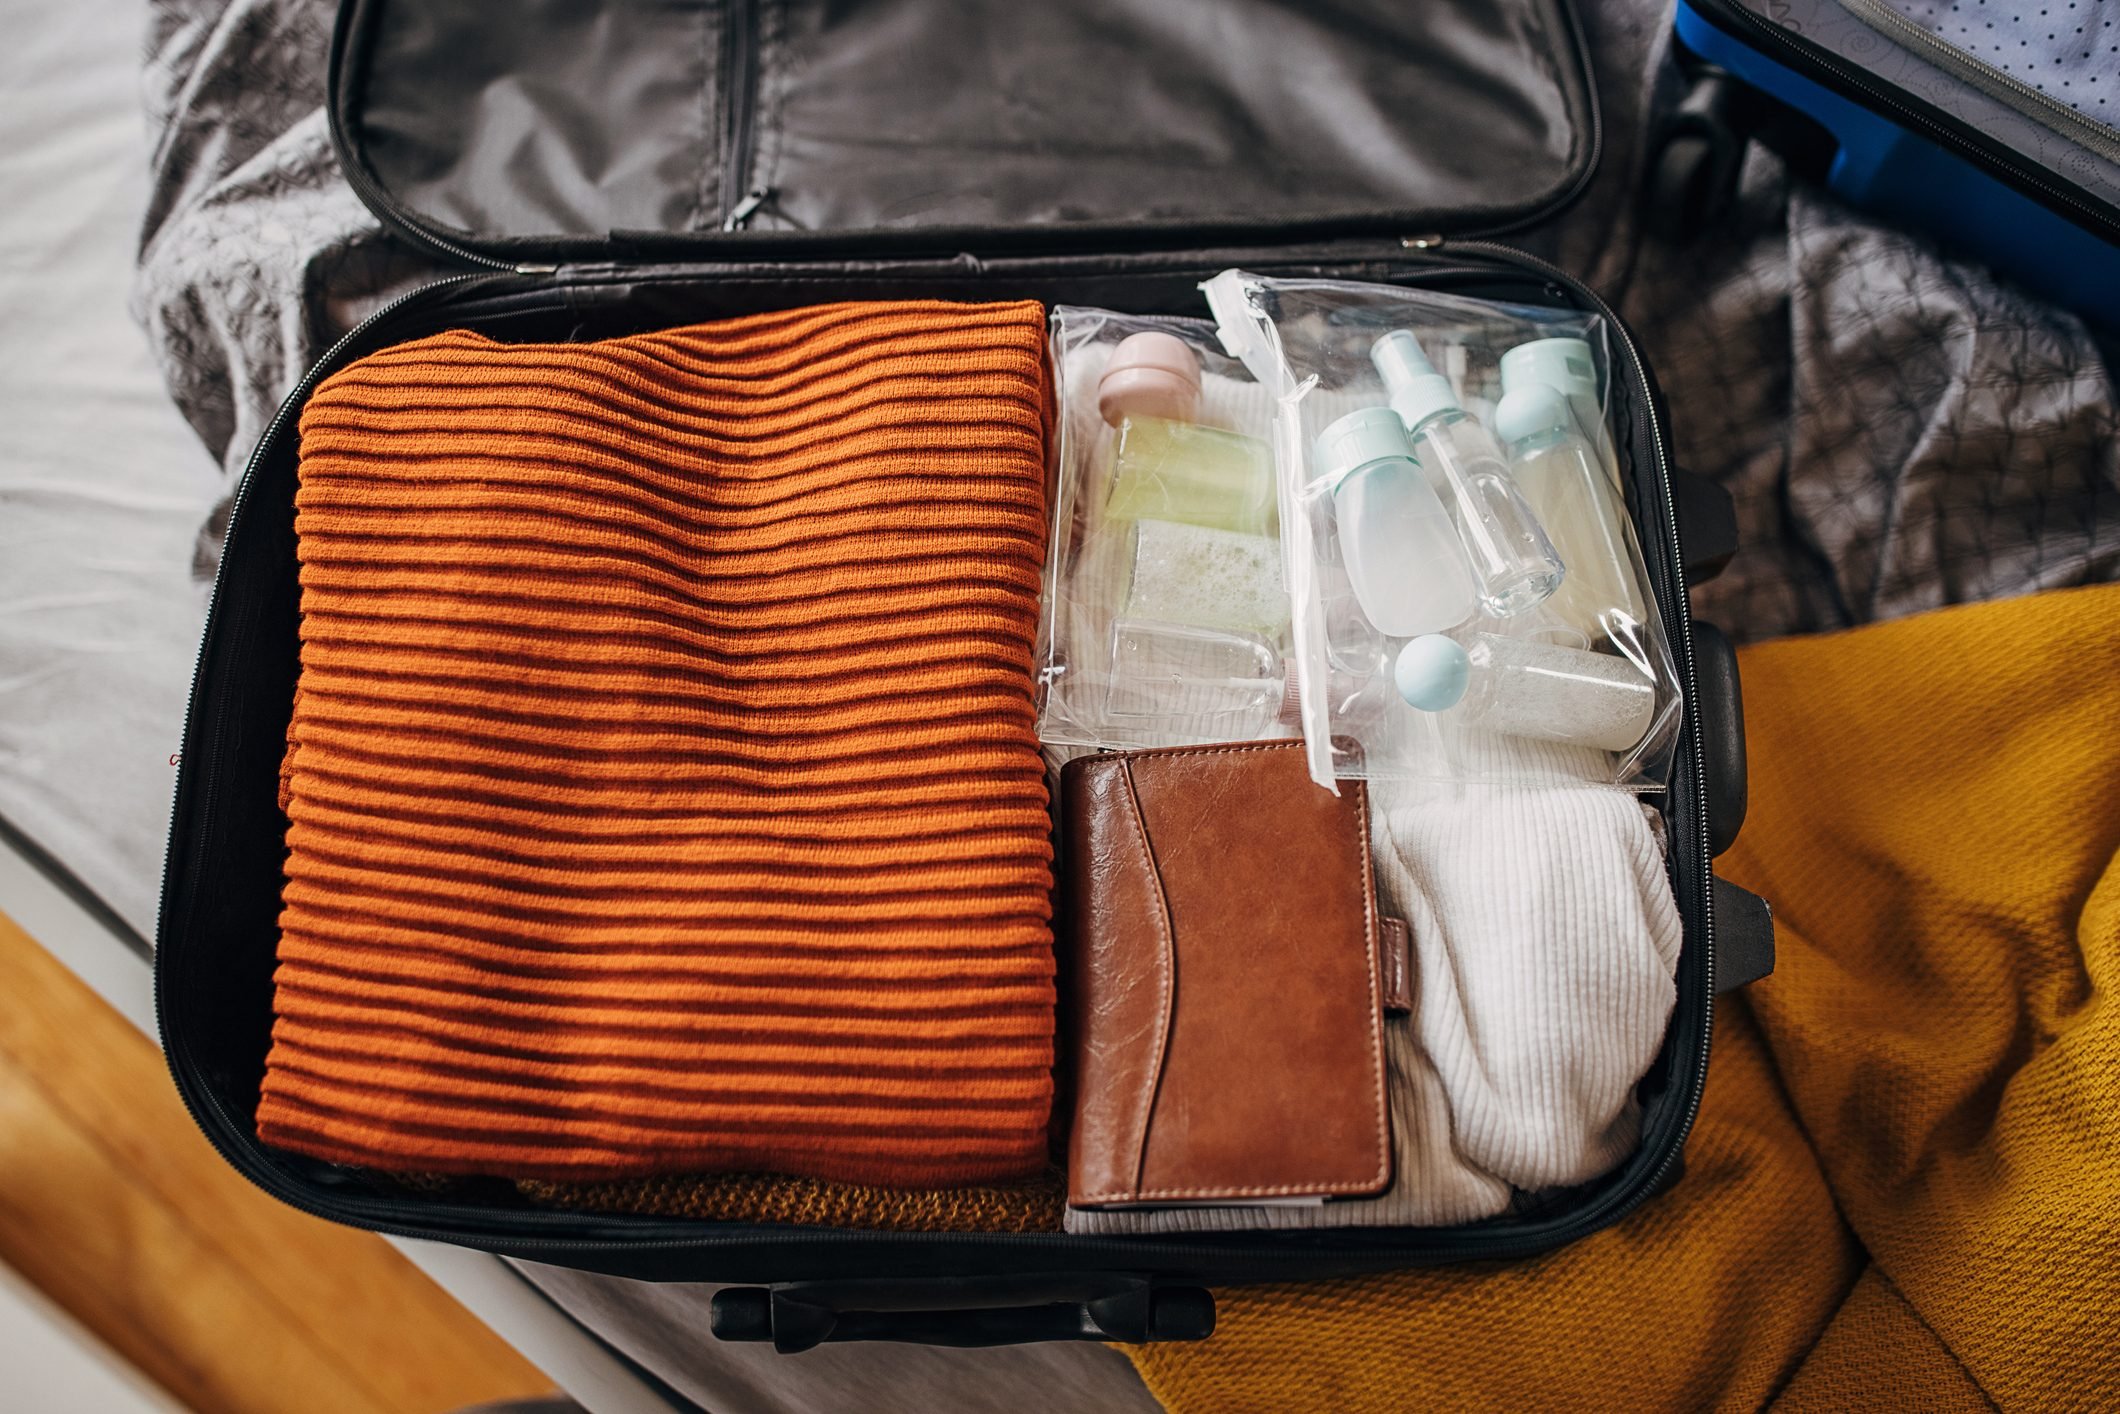 What Is Allowed in a Carry-on Bag?